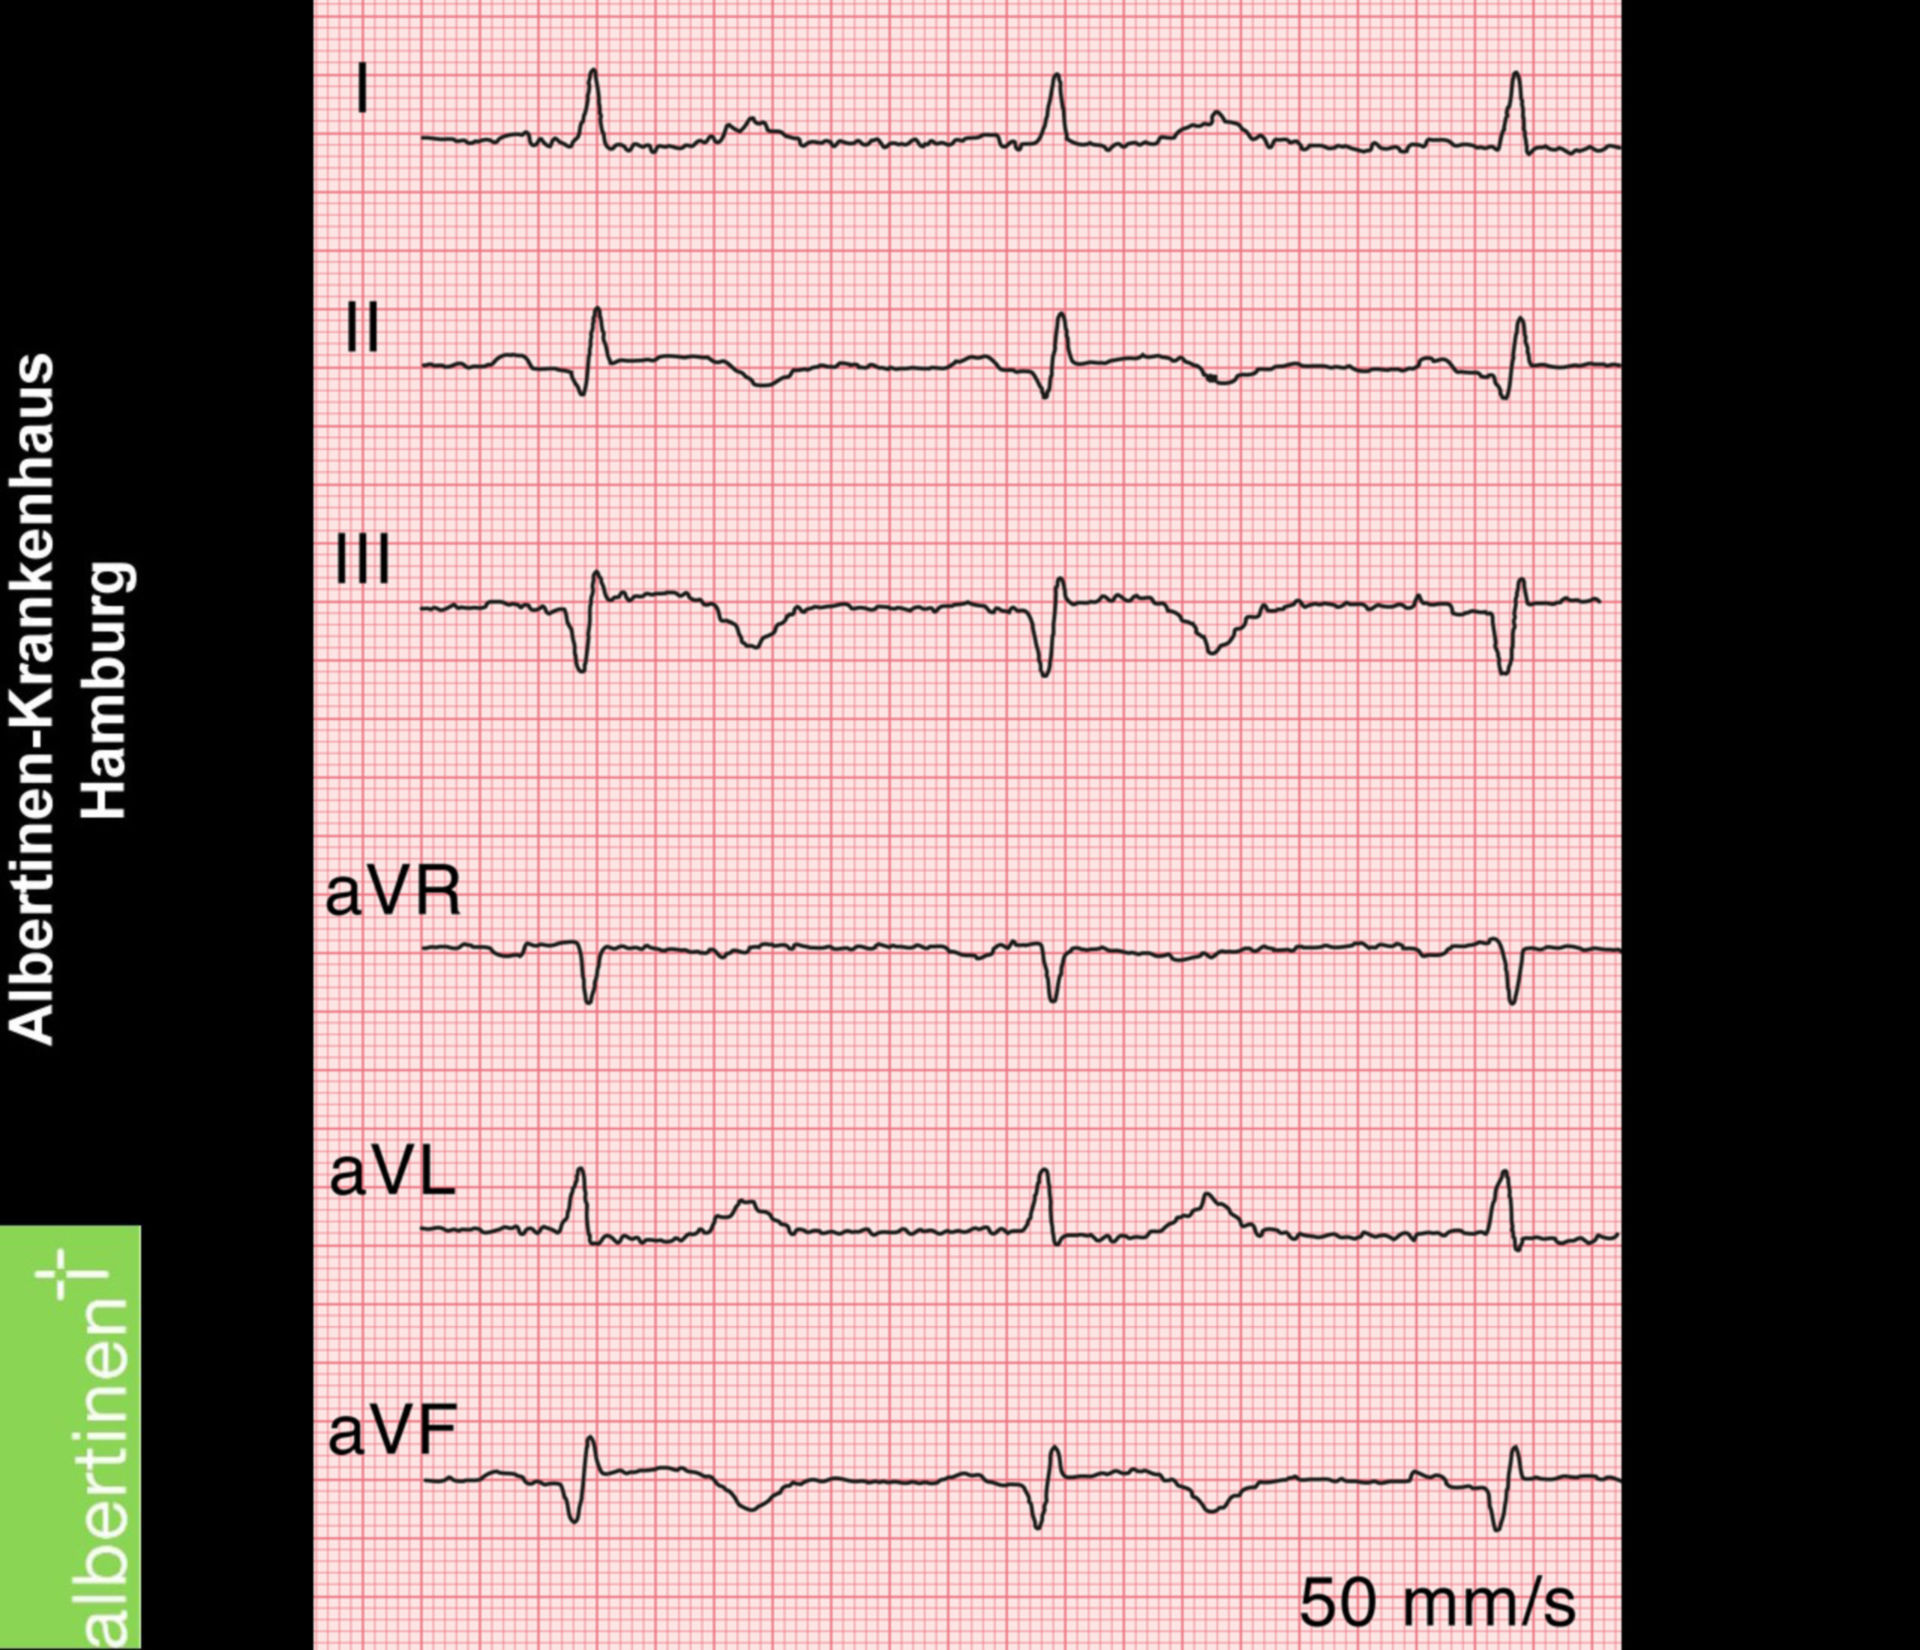 Myocardial infarction of the posterior wall: stage 2 (ECG)